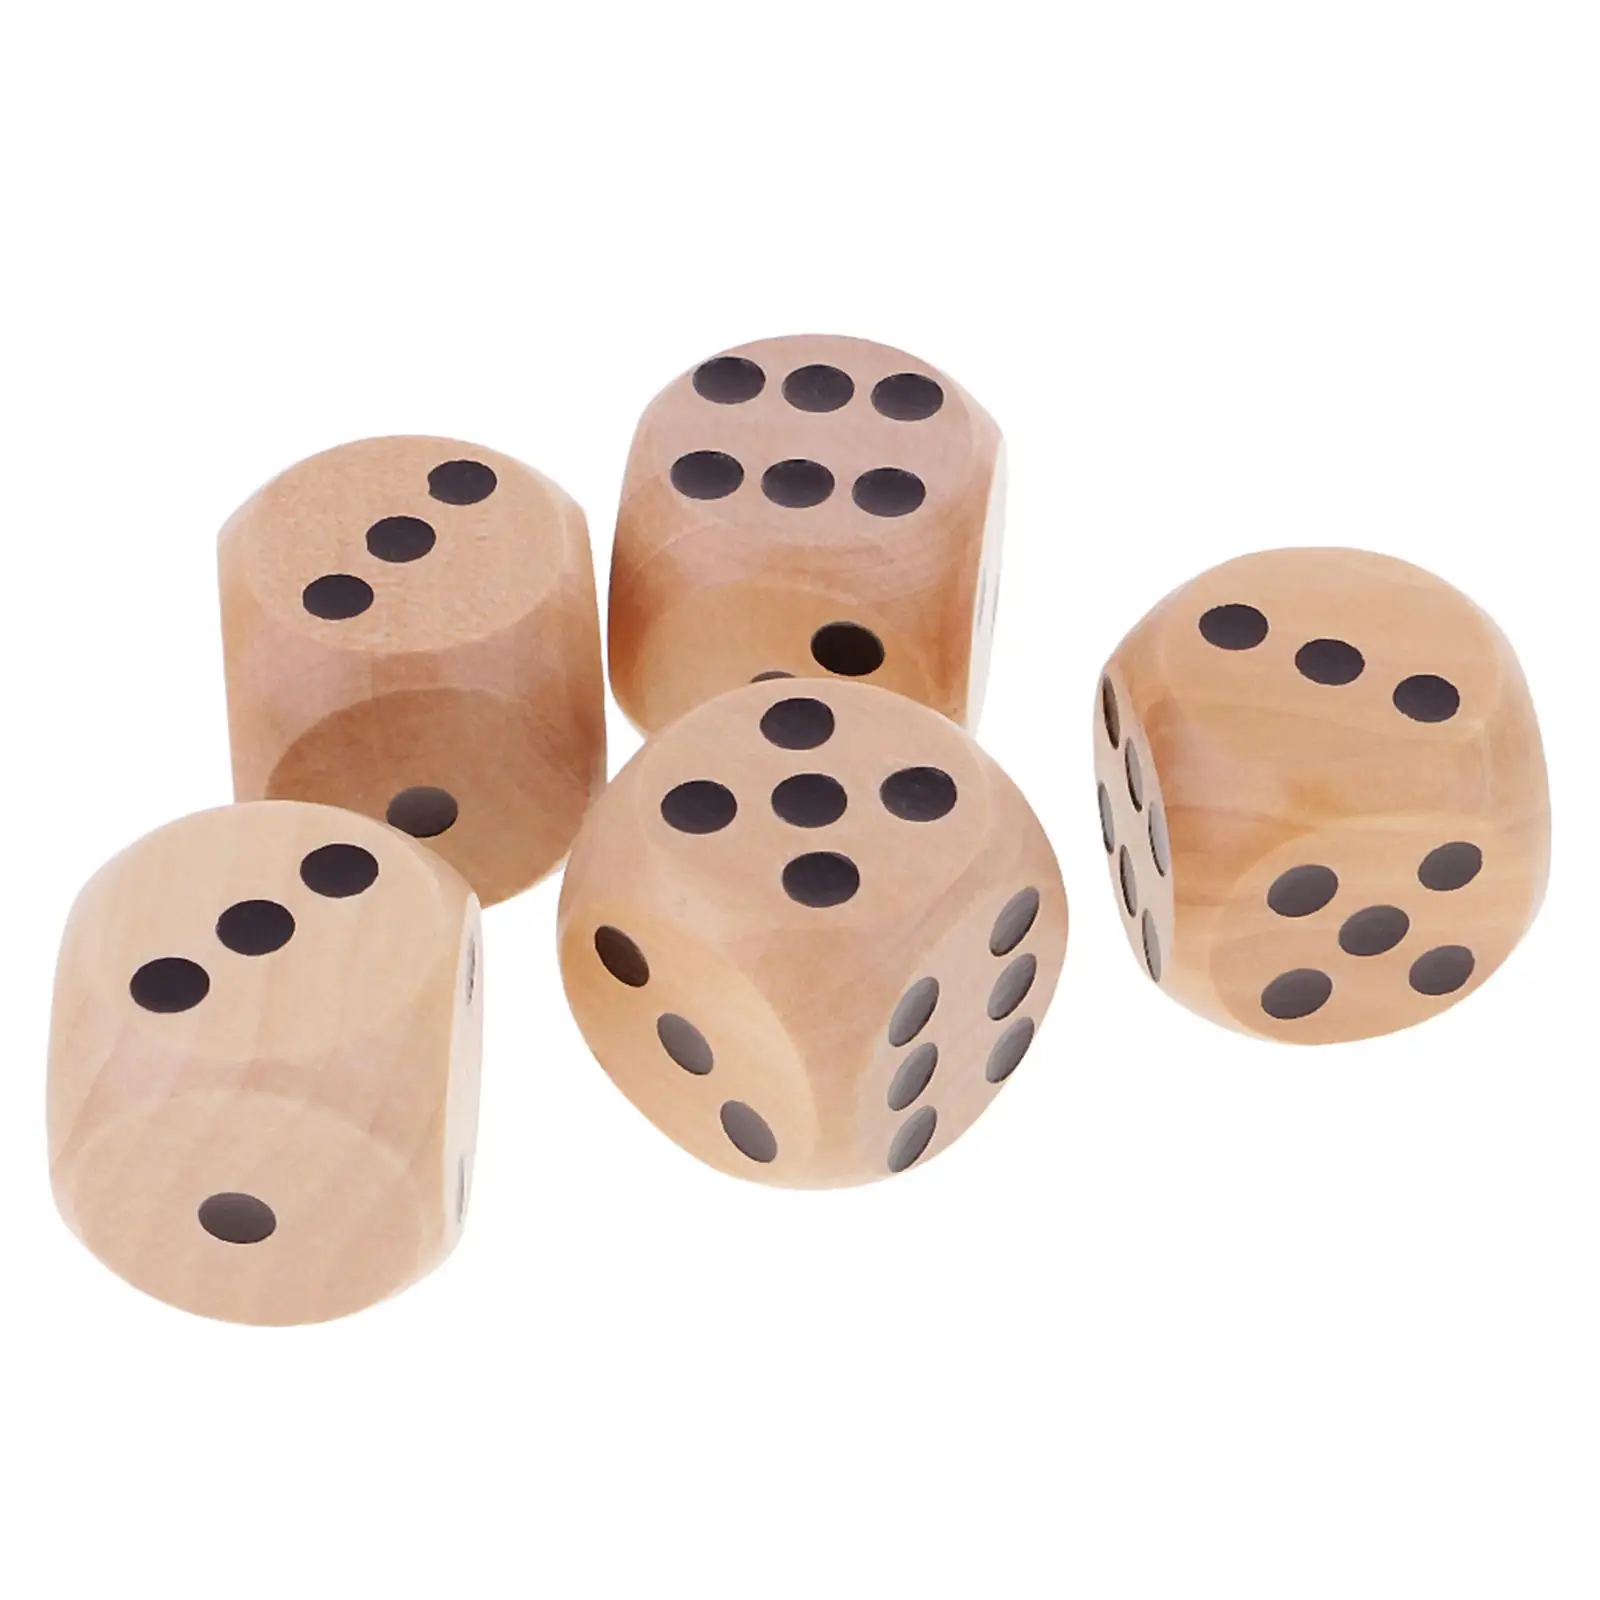 5-Pack D6 Sided 30mm Wooden Cubes Accessories for DND D&D RPG Board Games